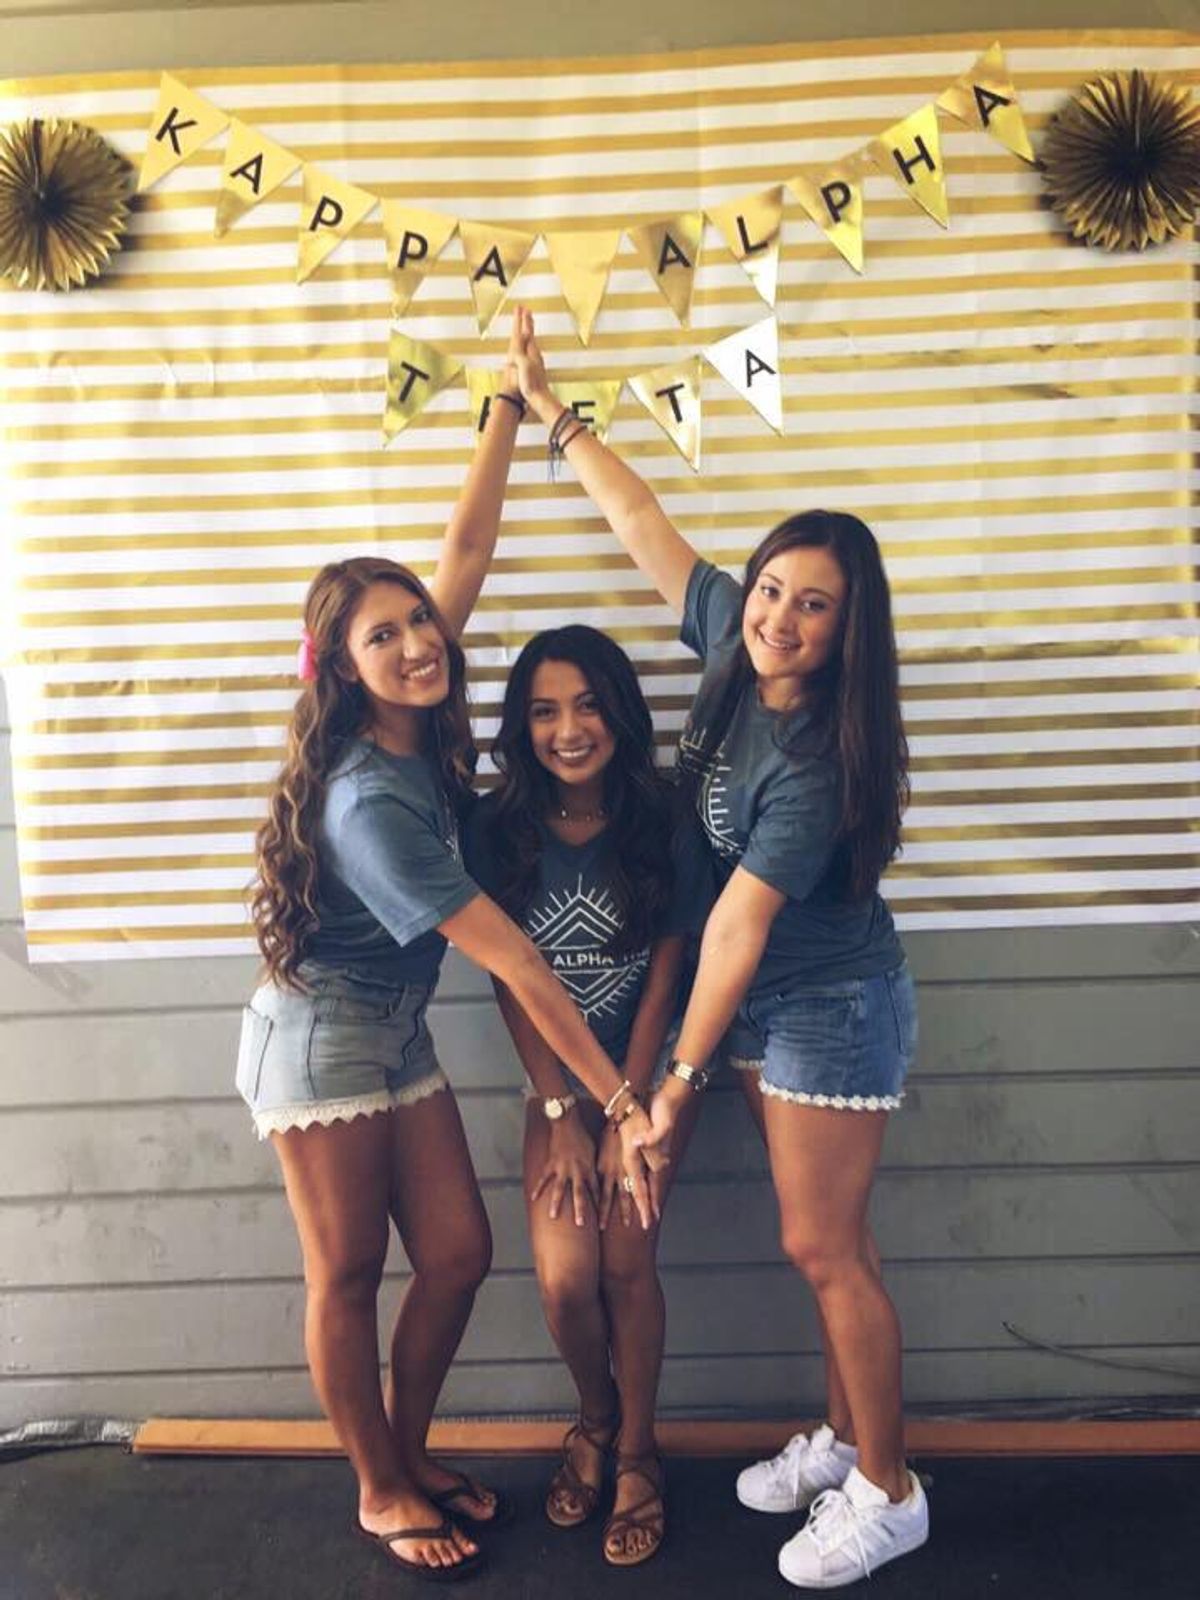 Things People Don't Understand About Sorority Girls